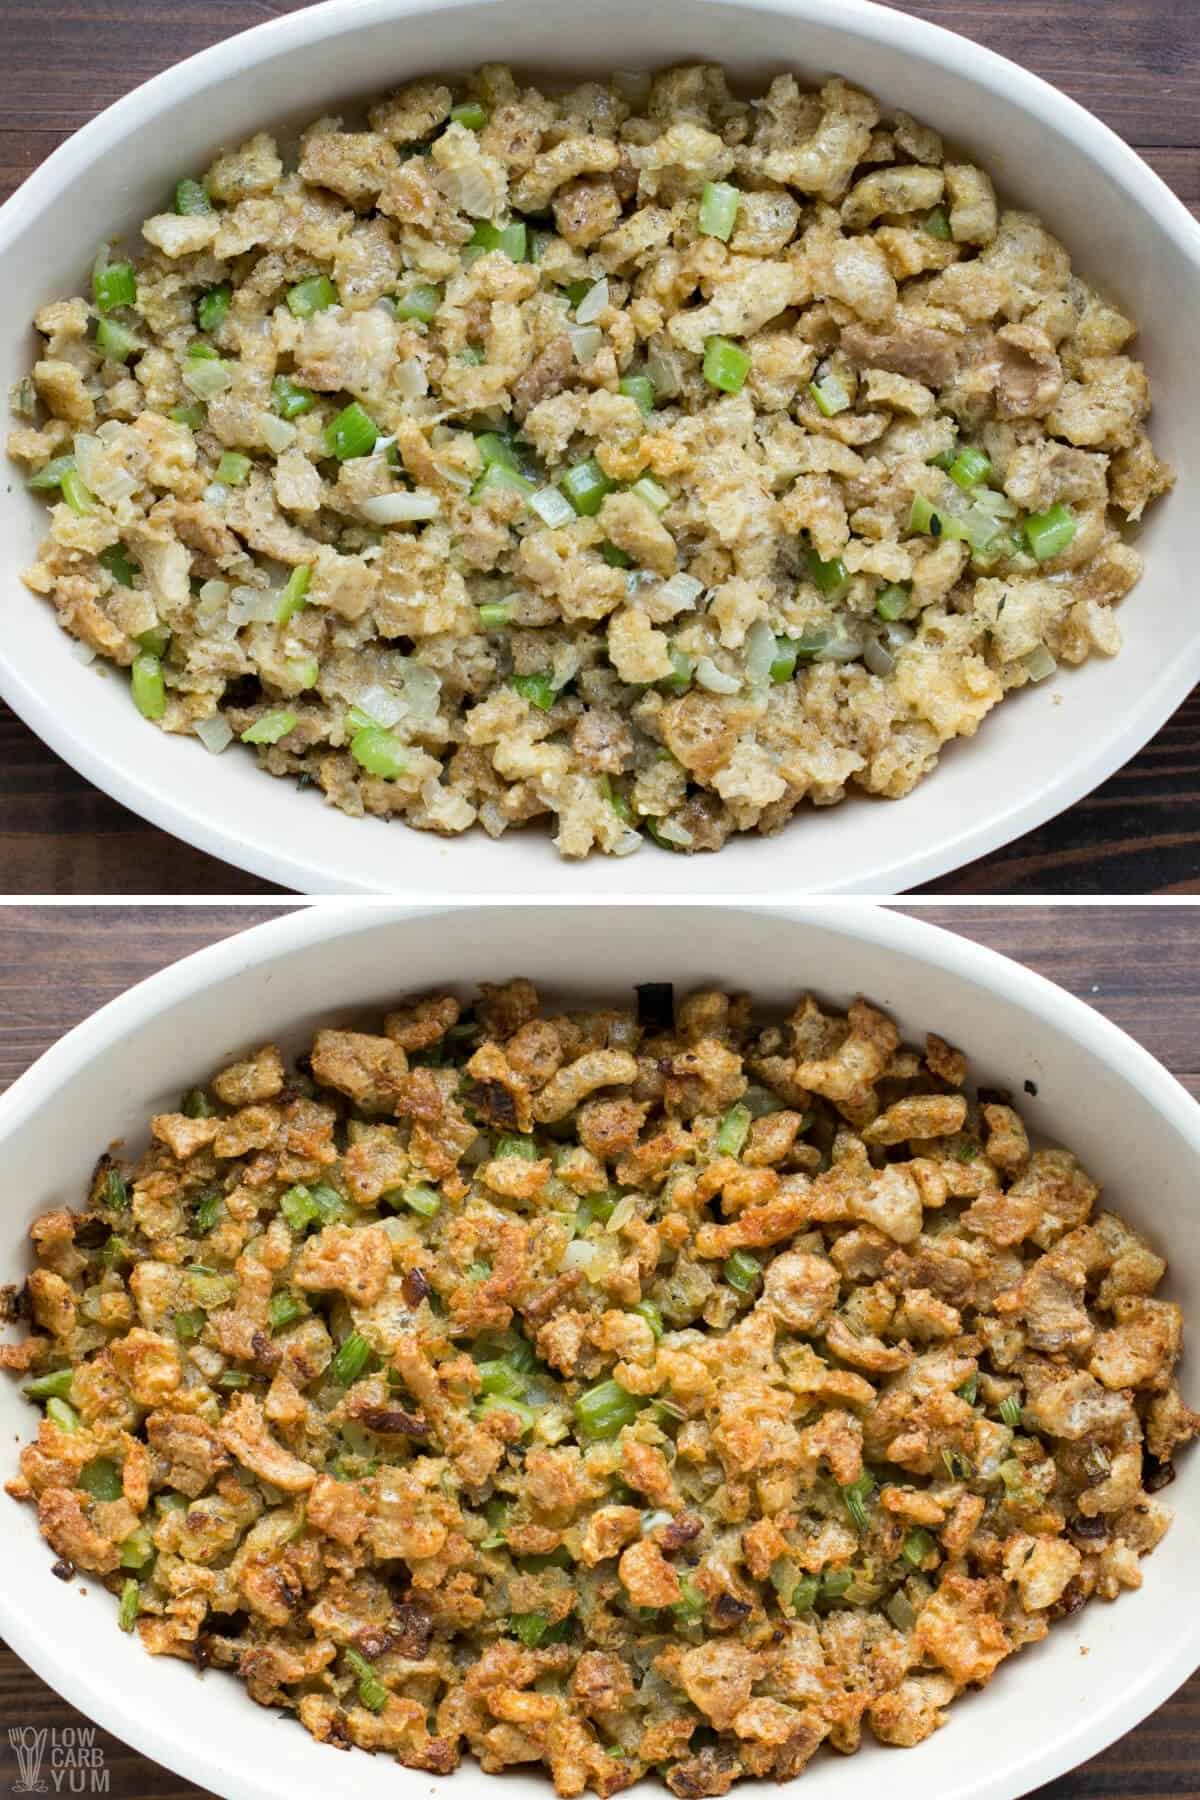 baking the stuffing in a casserole dish